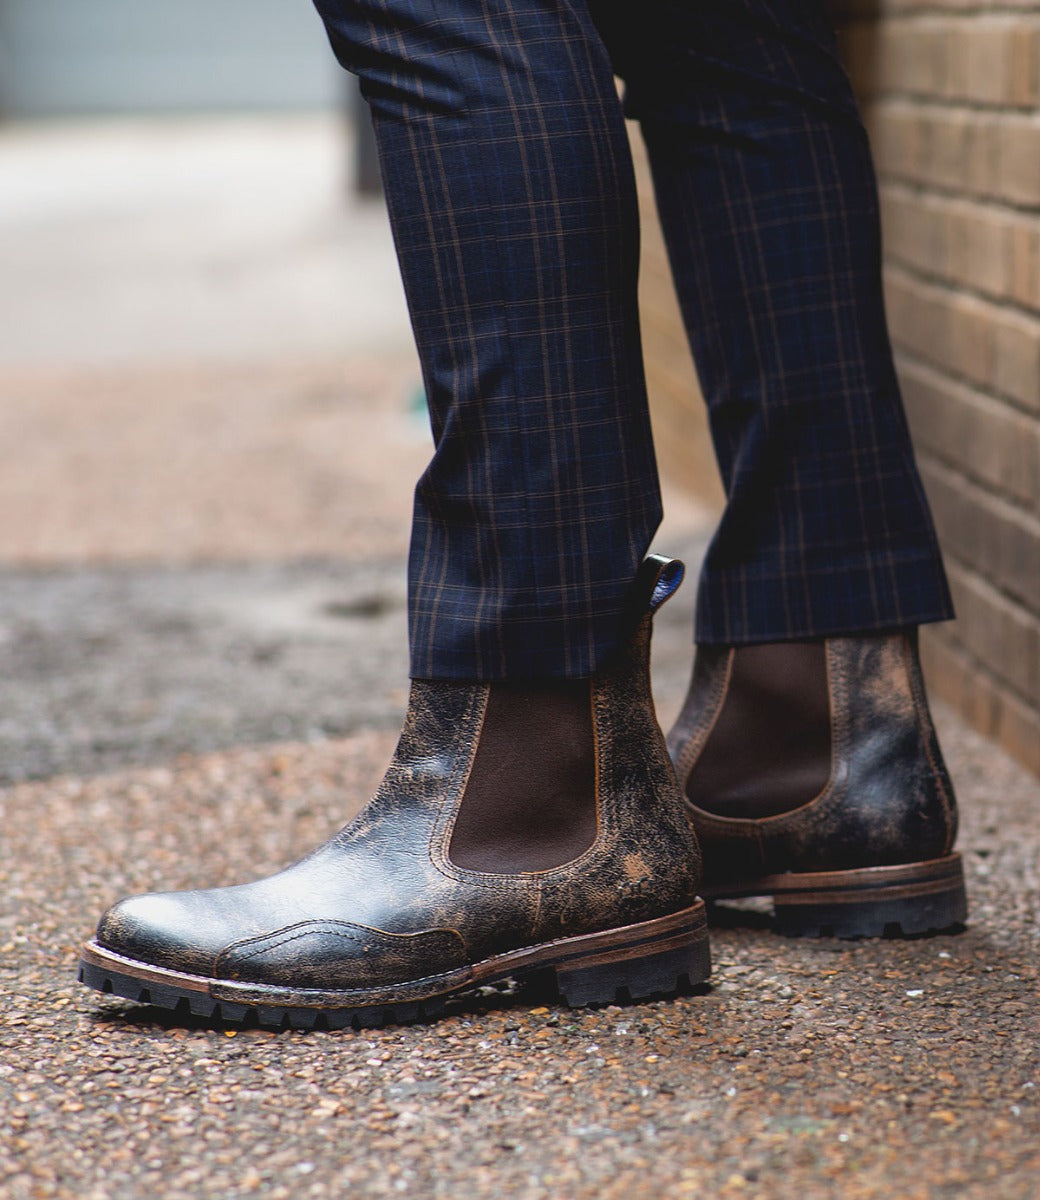 A person wearing Bed Stu's Brady Trek Black Lux Boots and plaid trousers standing on a pebbled surface next to a brick wall.